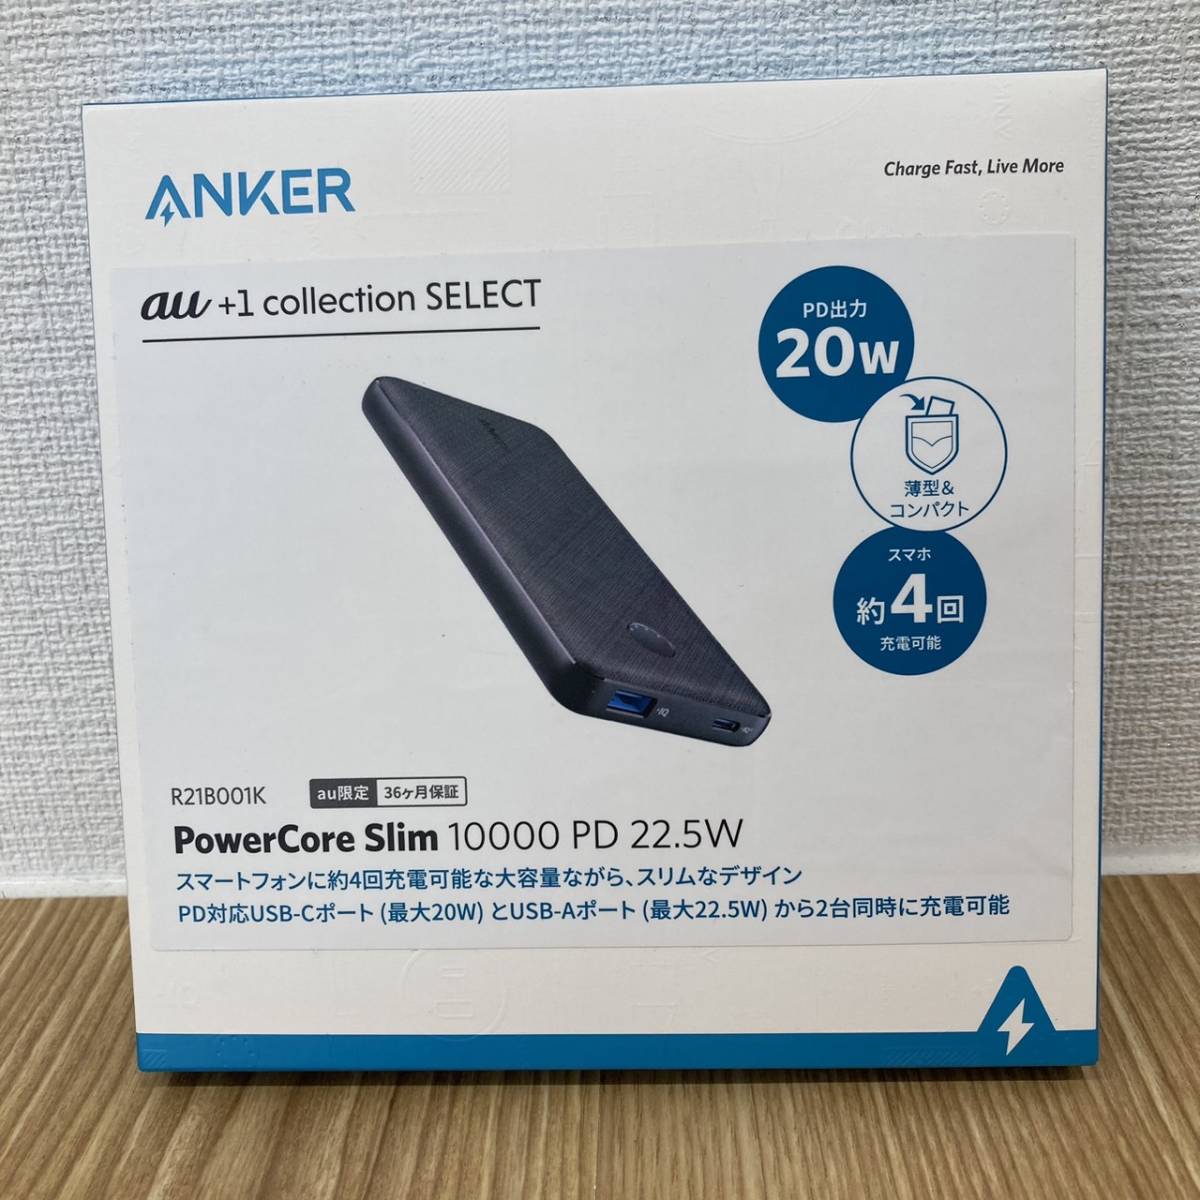 ANKER　アンカー　モバイルバッテリー　au+1collection SELECT　Power Core Slim 10000 PD 22.5W_画像1